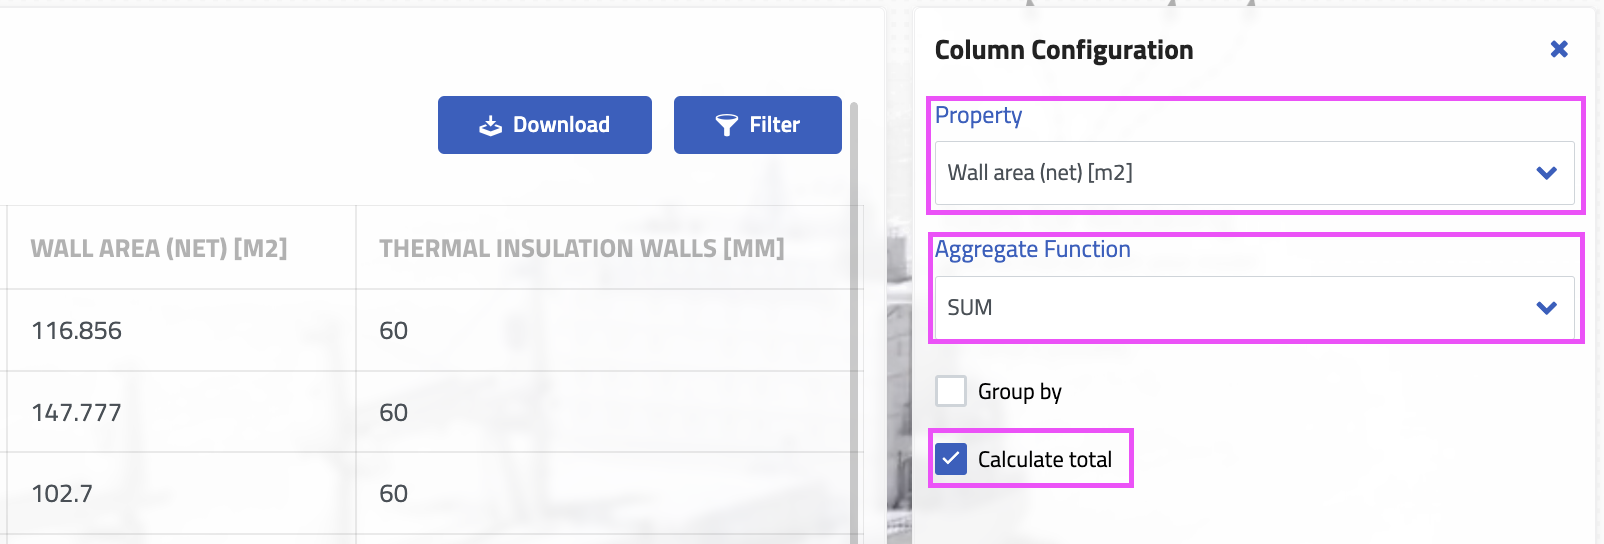 Column configuration for calculating total of the wall area